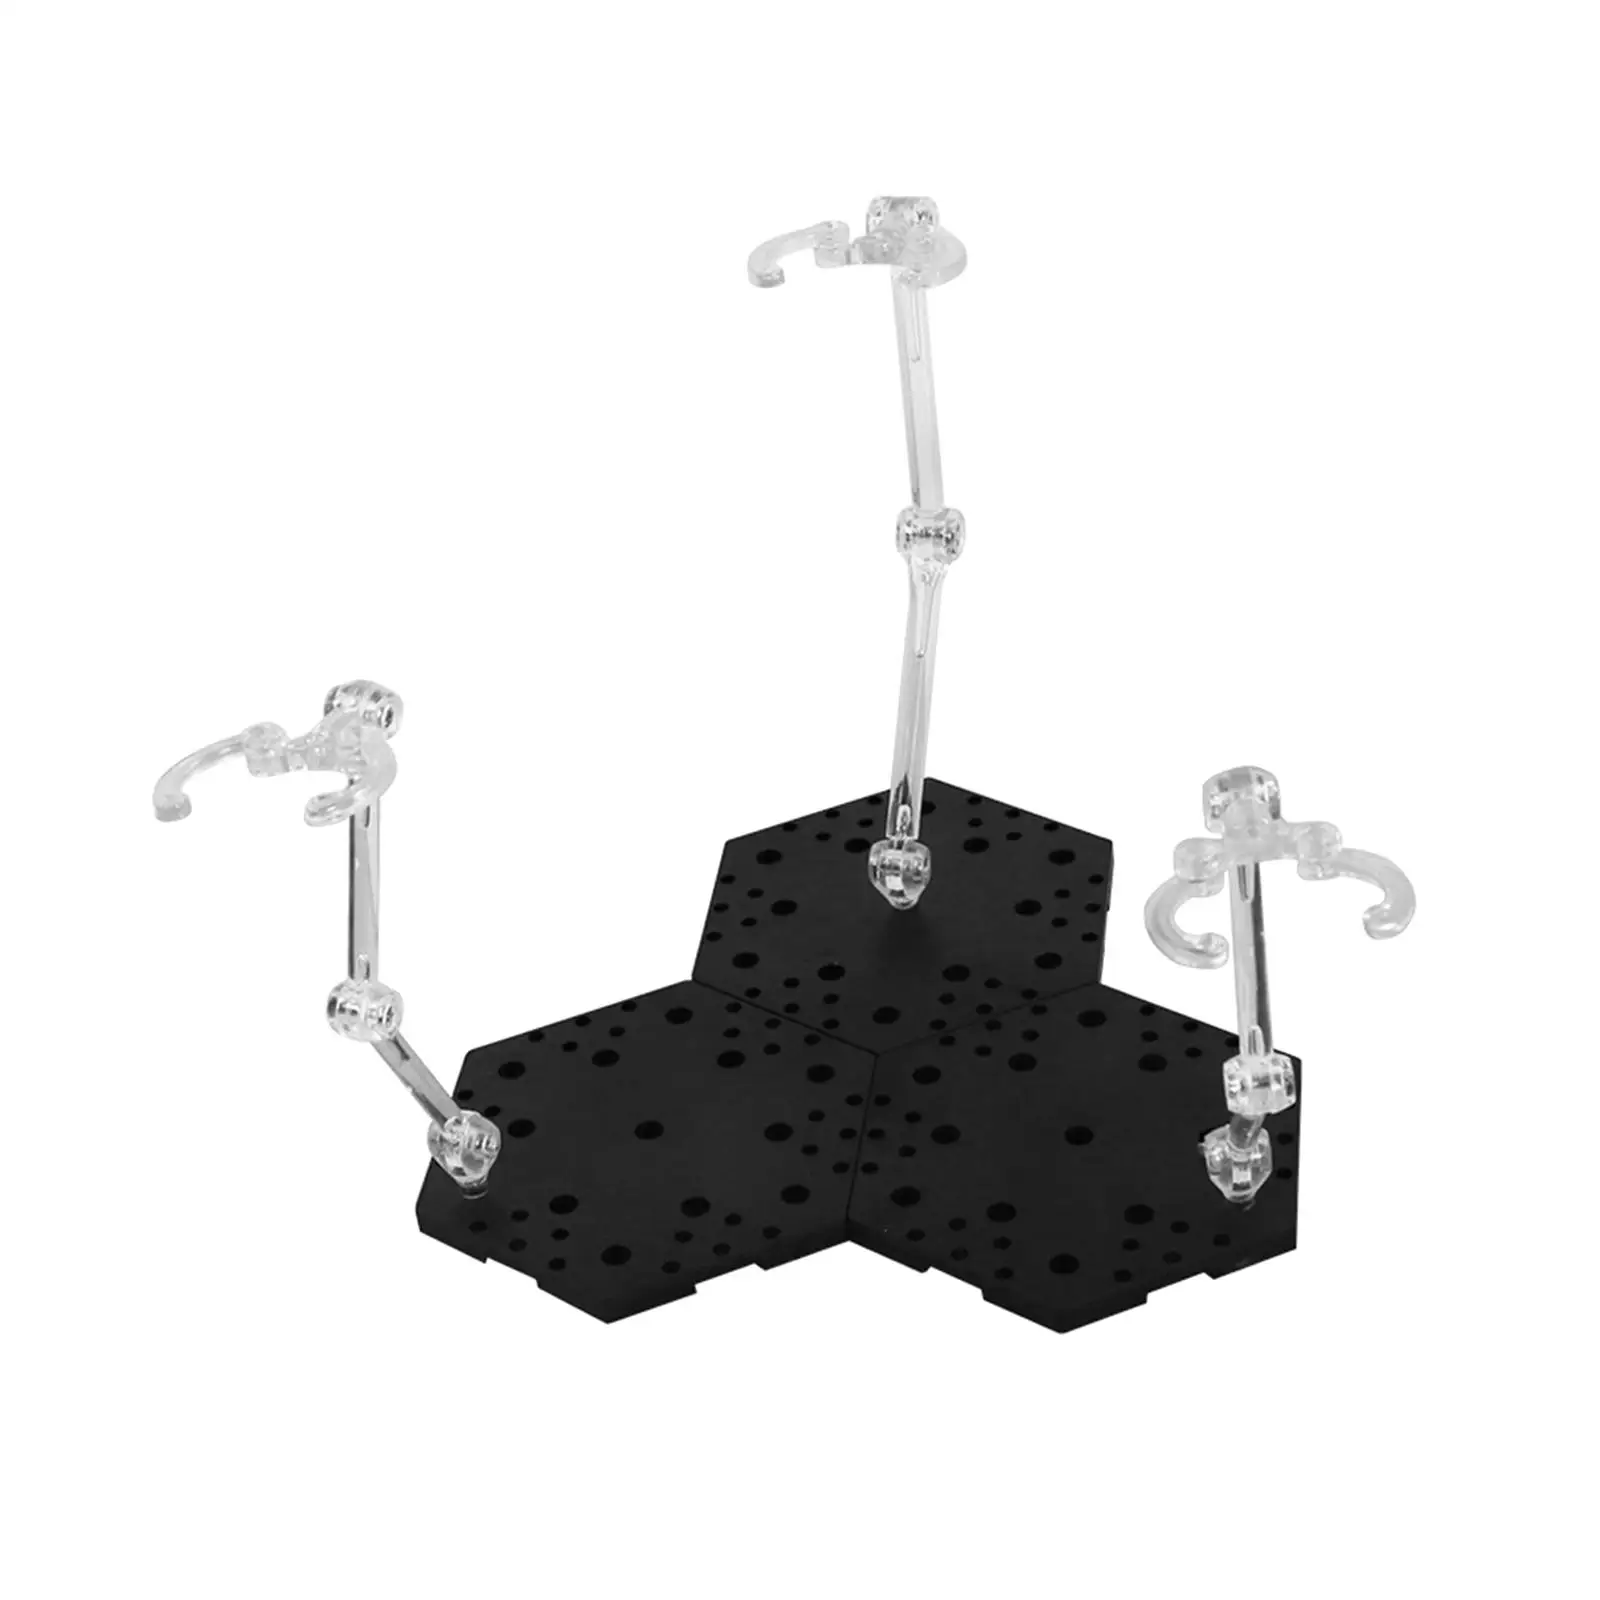 Sturdy Figure Base Display Rack Stand Support Bracket Holder for 1/144 Model Figures Toys DIY Accessories